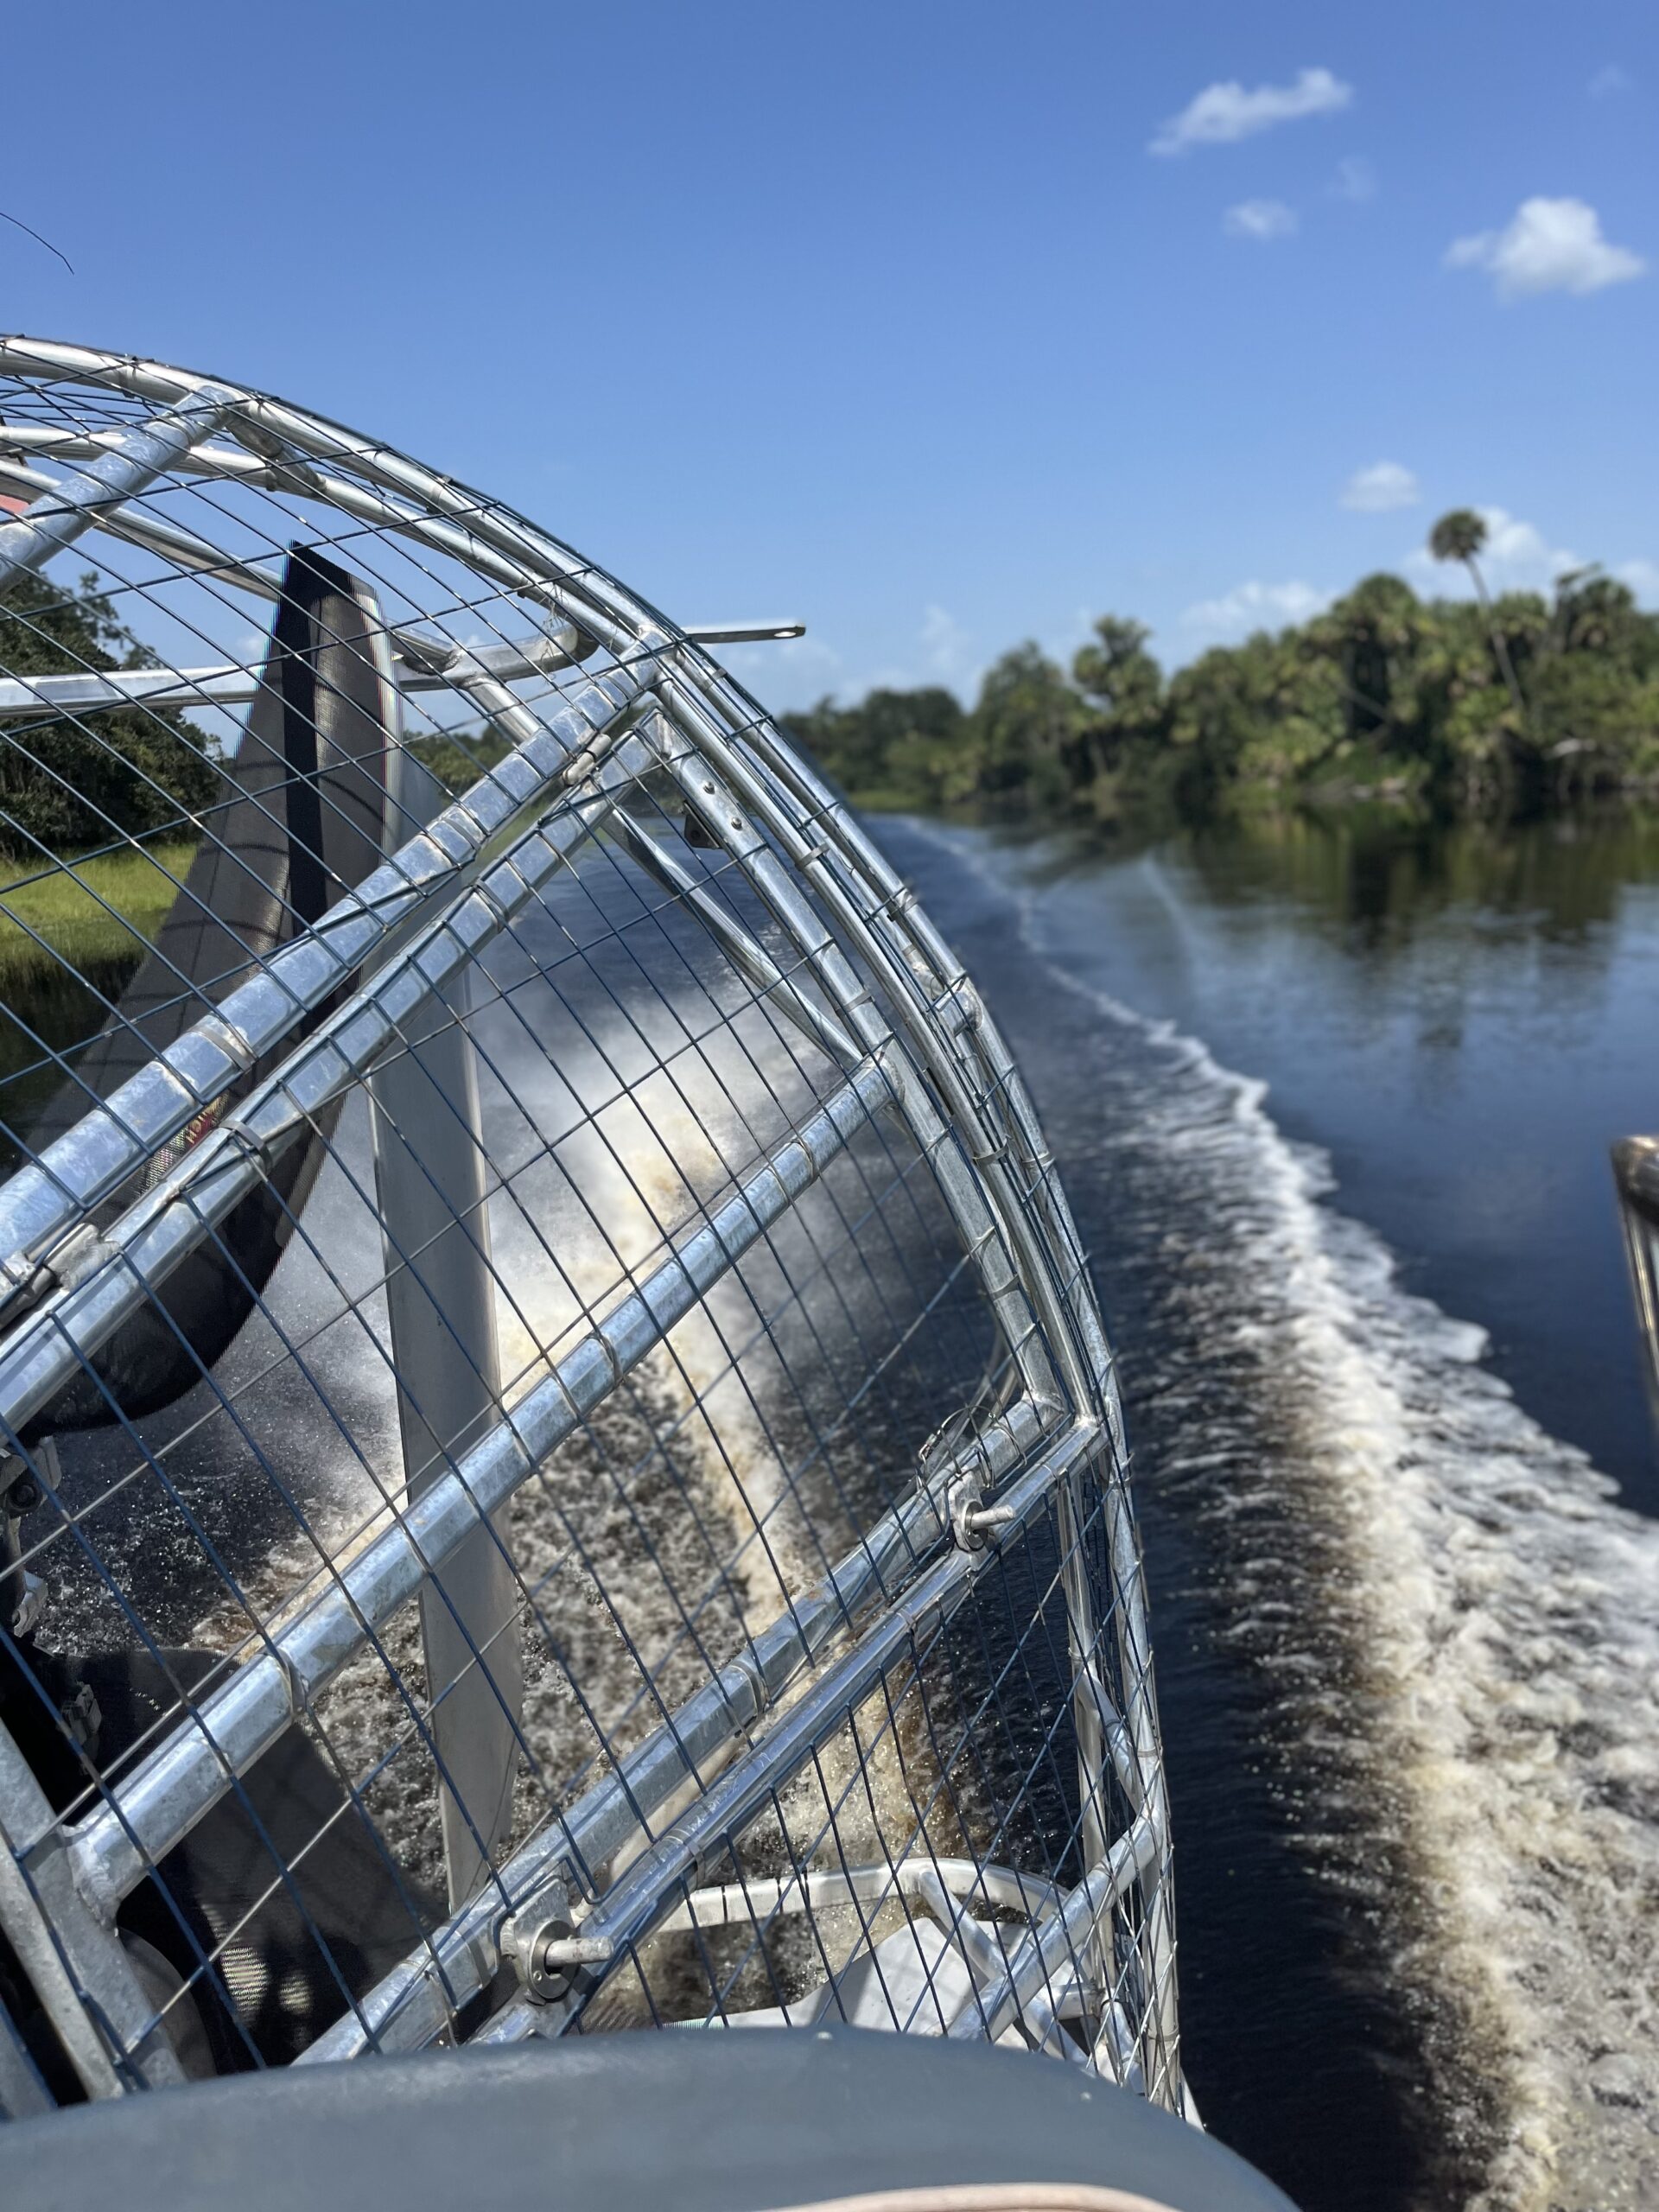 Airboat Trivia We Bet You Didn’t Know